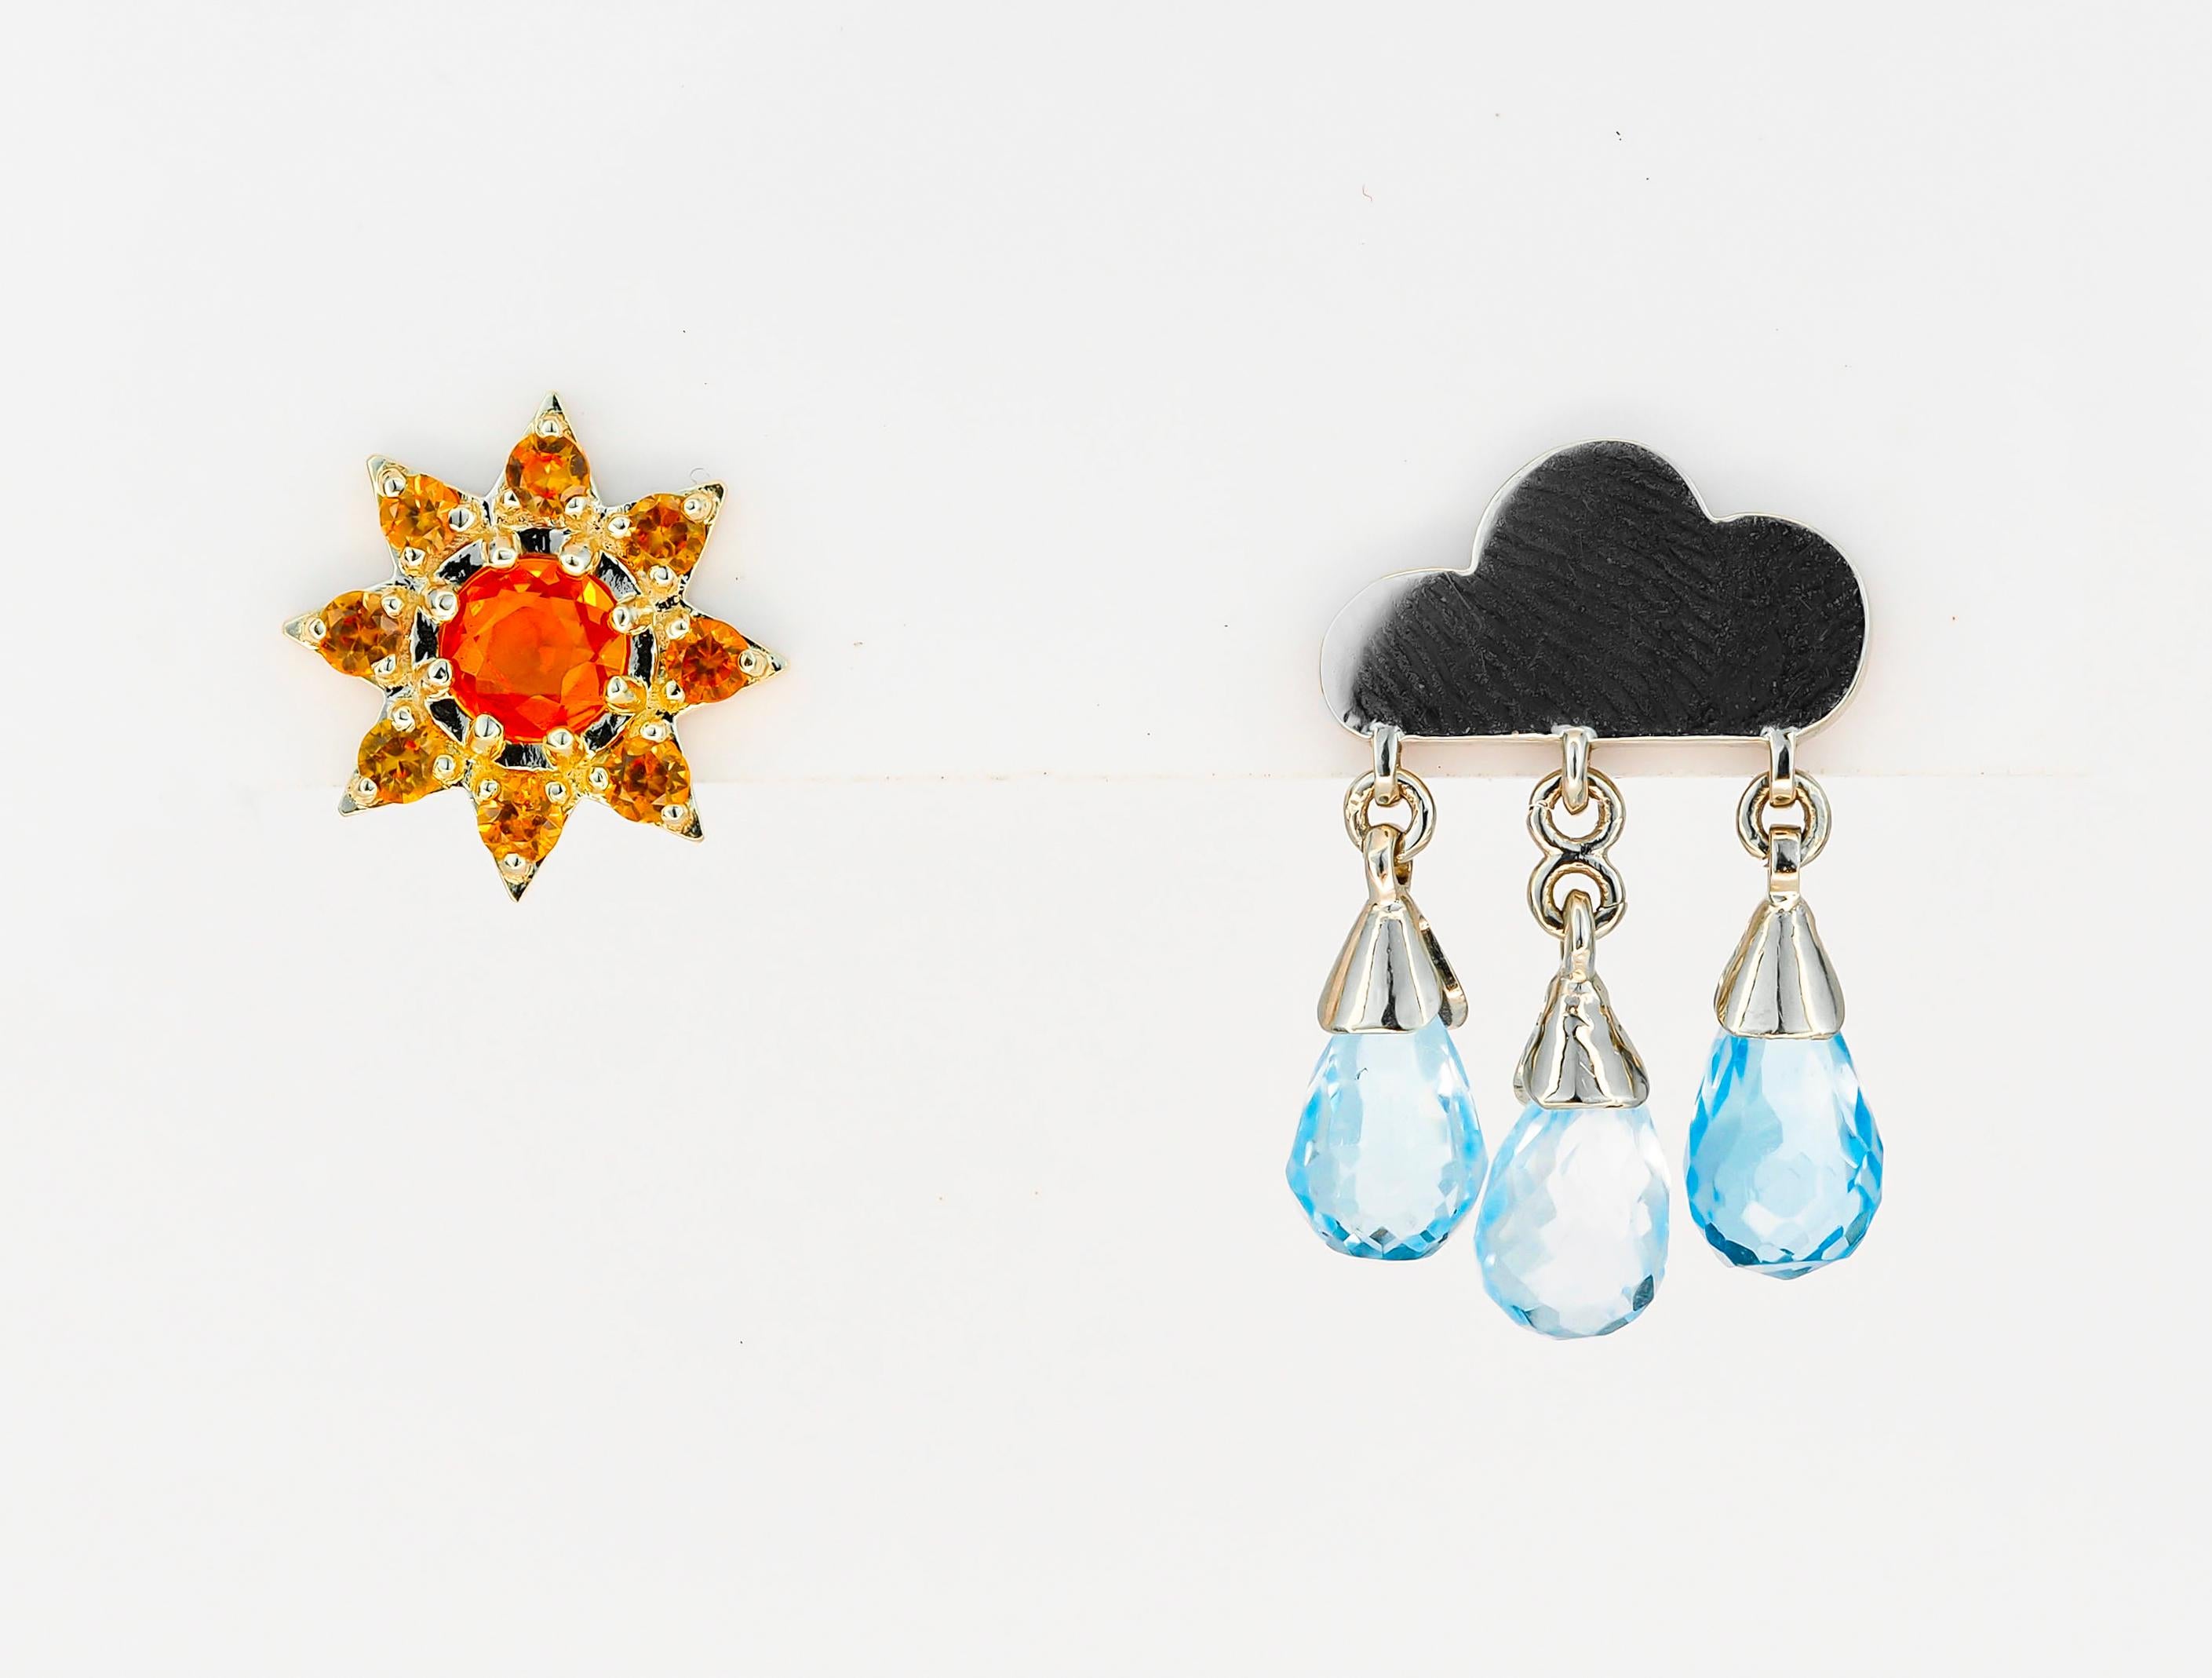 Rain and sun 14k gold earring studs. 
Mismatched earrings. Weather inspired earrings. Natural topaz, sapphire studs. Teardrop earrings.

14k yellow and white gold
Weight: 3.15 g. 

1. Rain cloud
white 14k gold
Size: 19x12mm
Gemstones:
3 topazs, blue